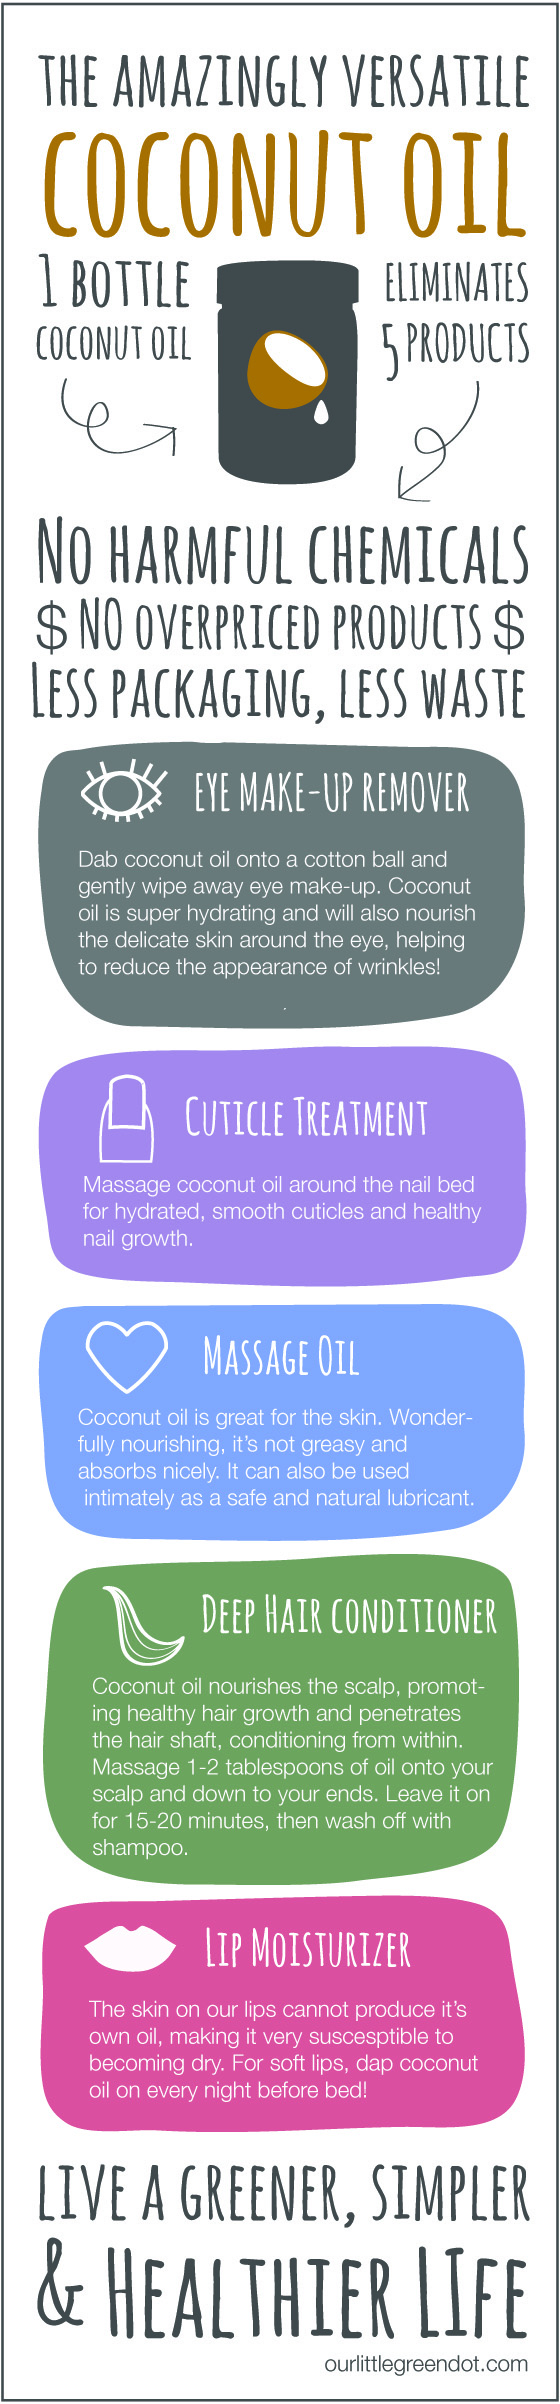 Coconut oil infographic: 5 ways to use your coconut oil